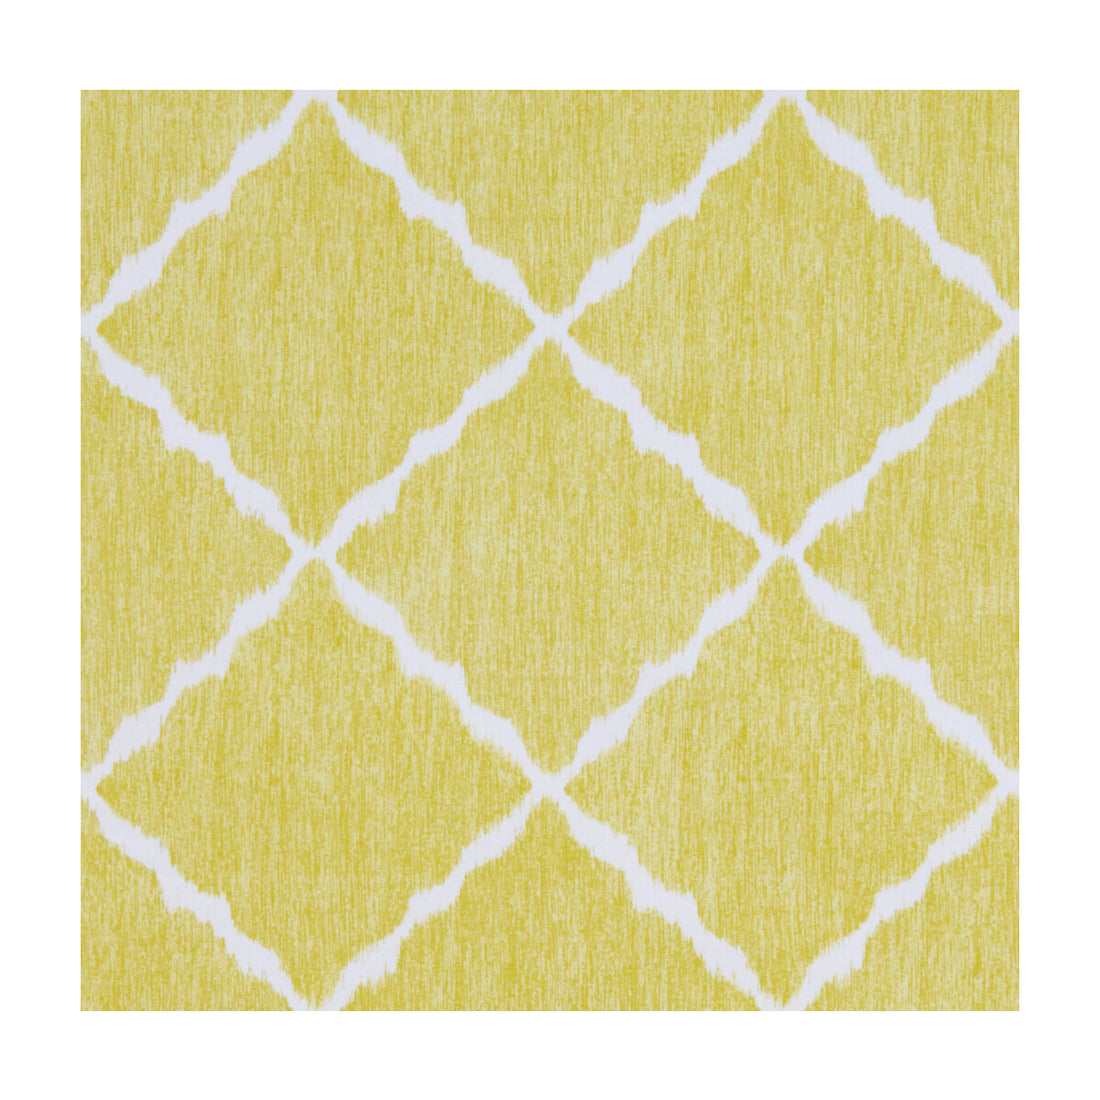 Ikat Strie fabric in sunshine color - pattern IKATSTRIE.40.0 - by Kravet Basics in the Sarah Richardson Harmony collection